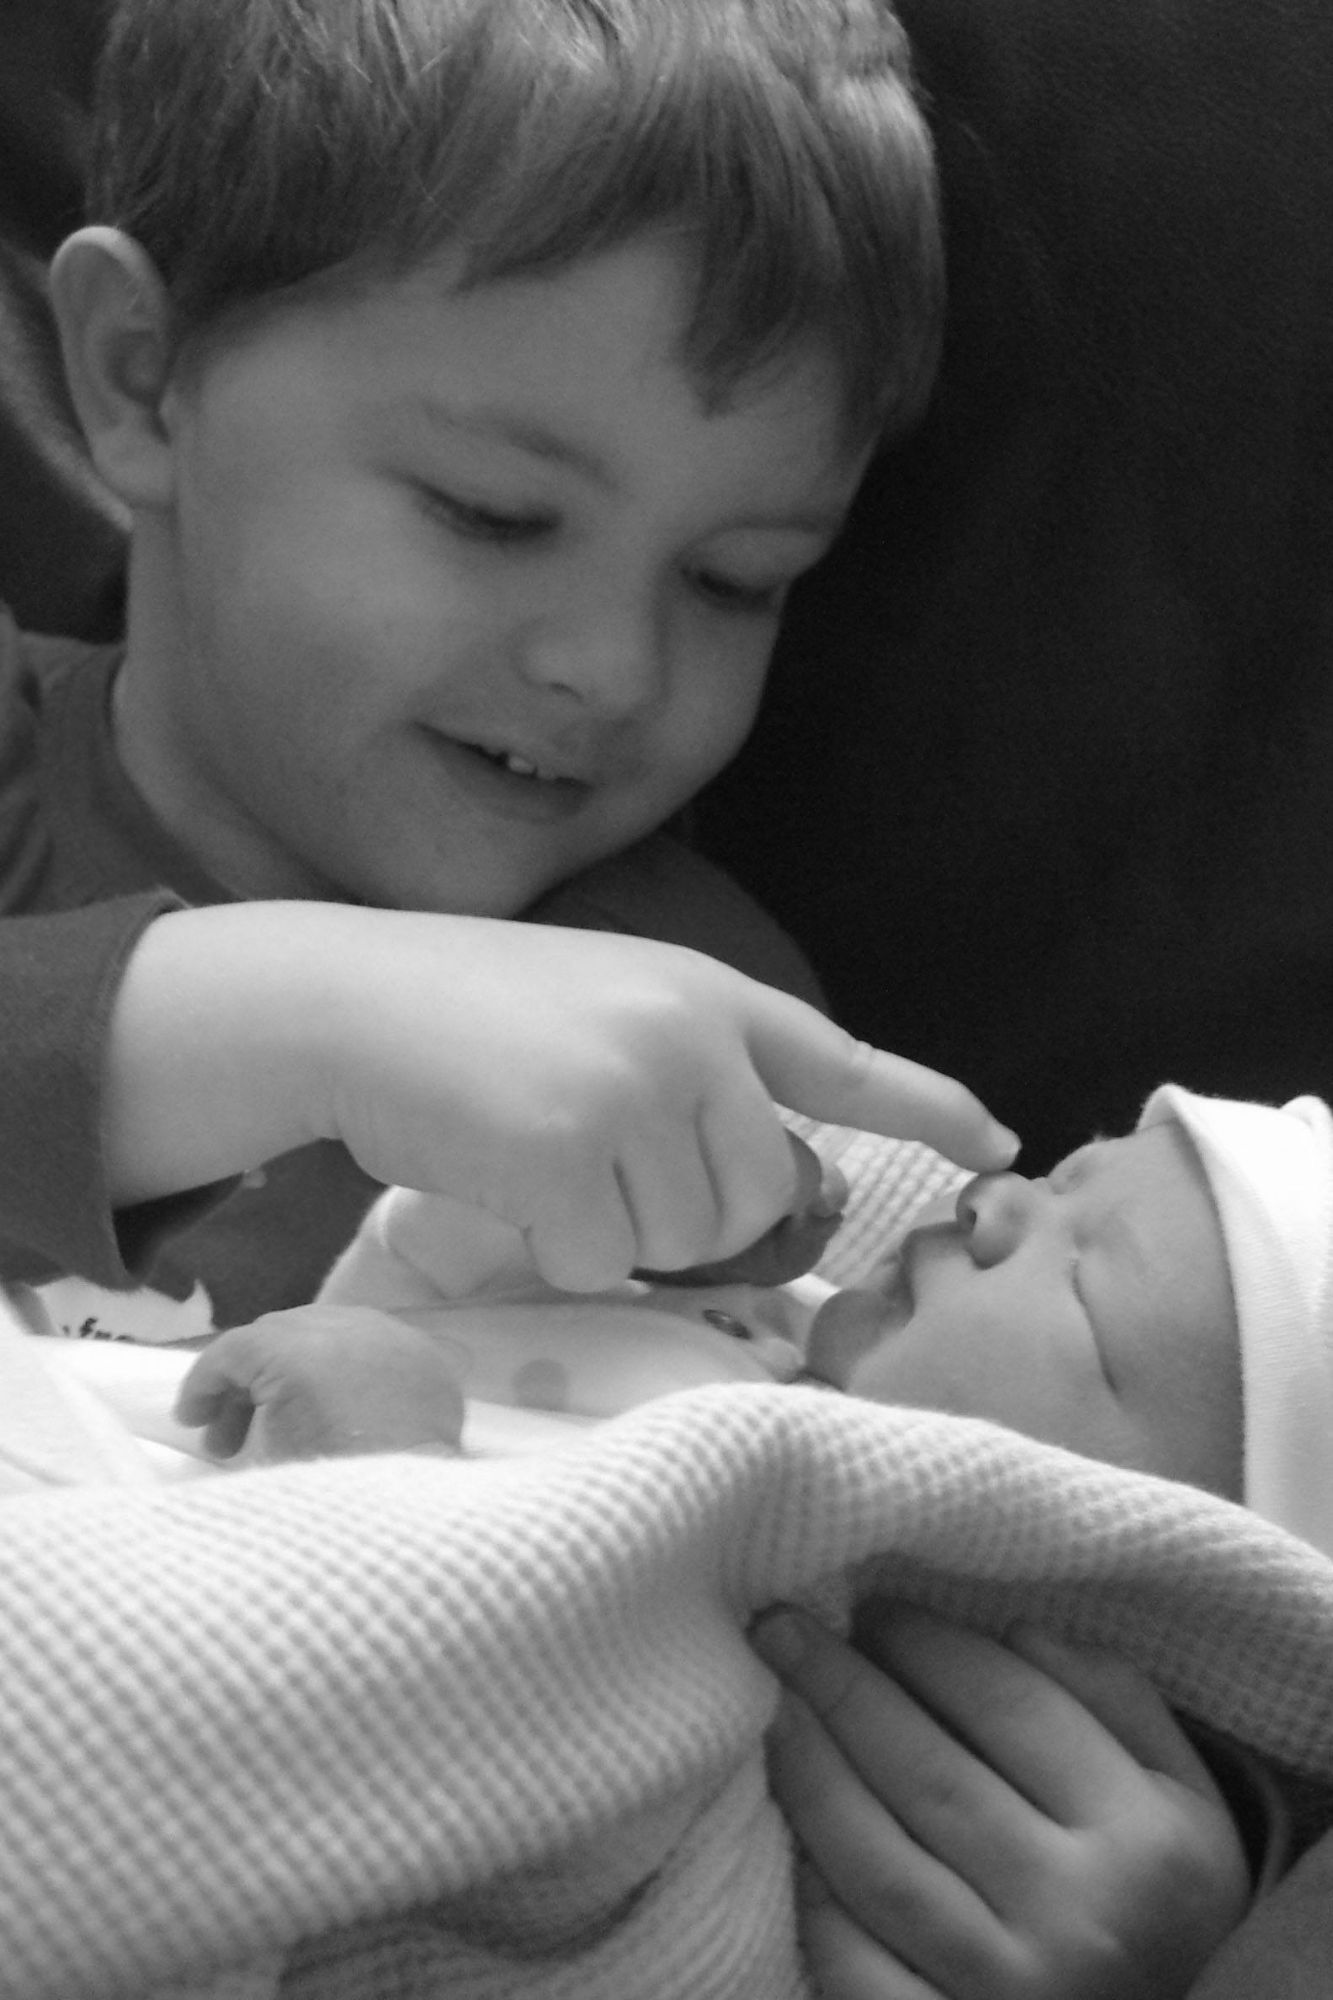 A black and white image of a toddler cuddling a newborn baby wrapped in a blanket. The toddler is touching his brother's nose.